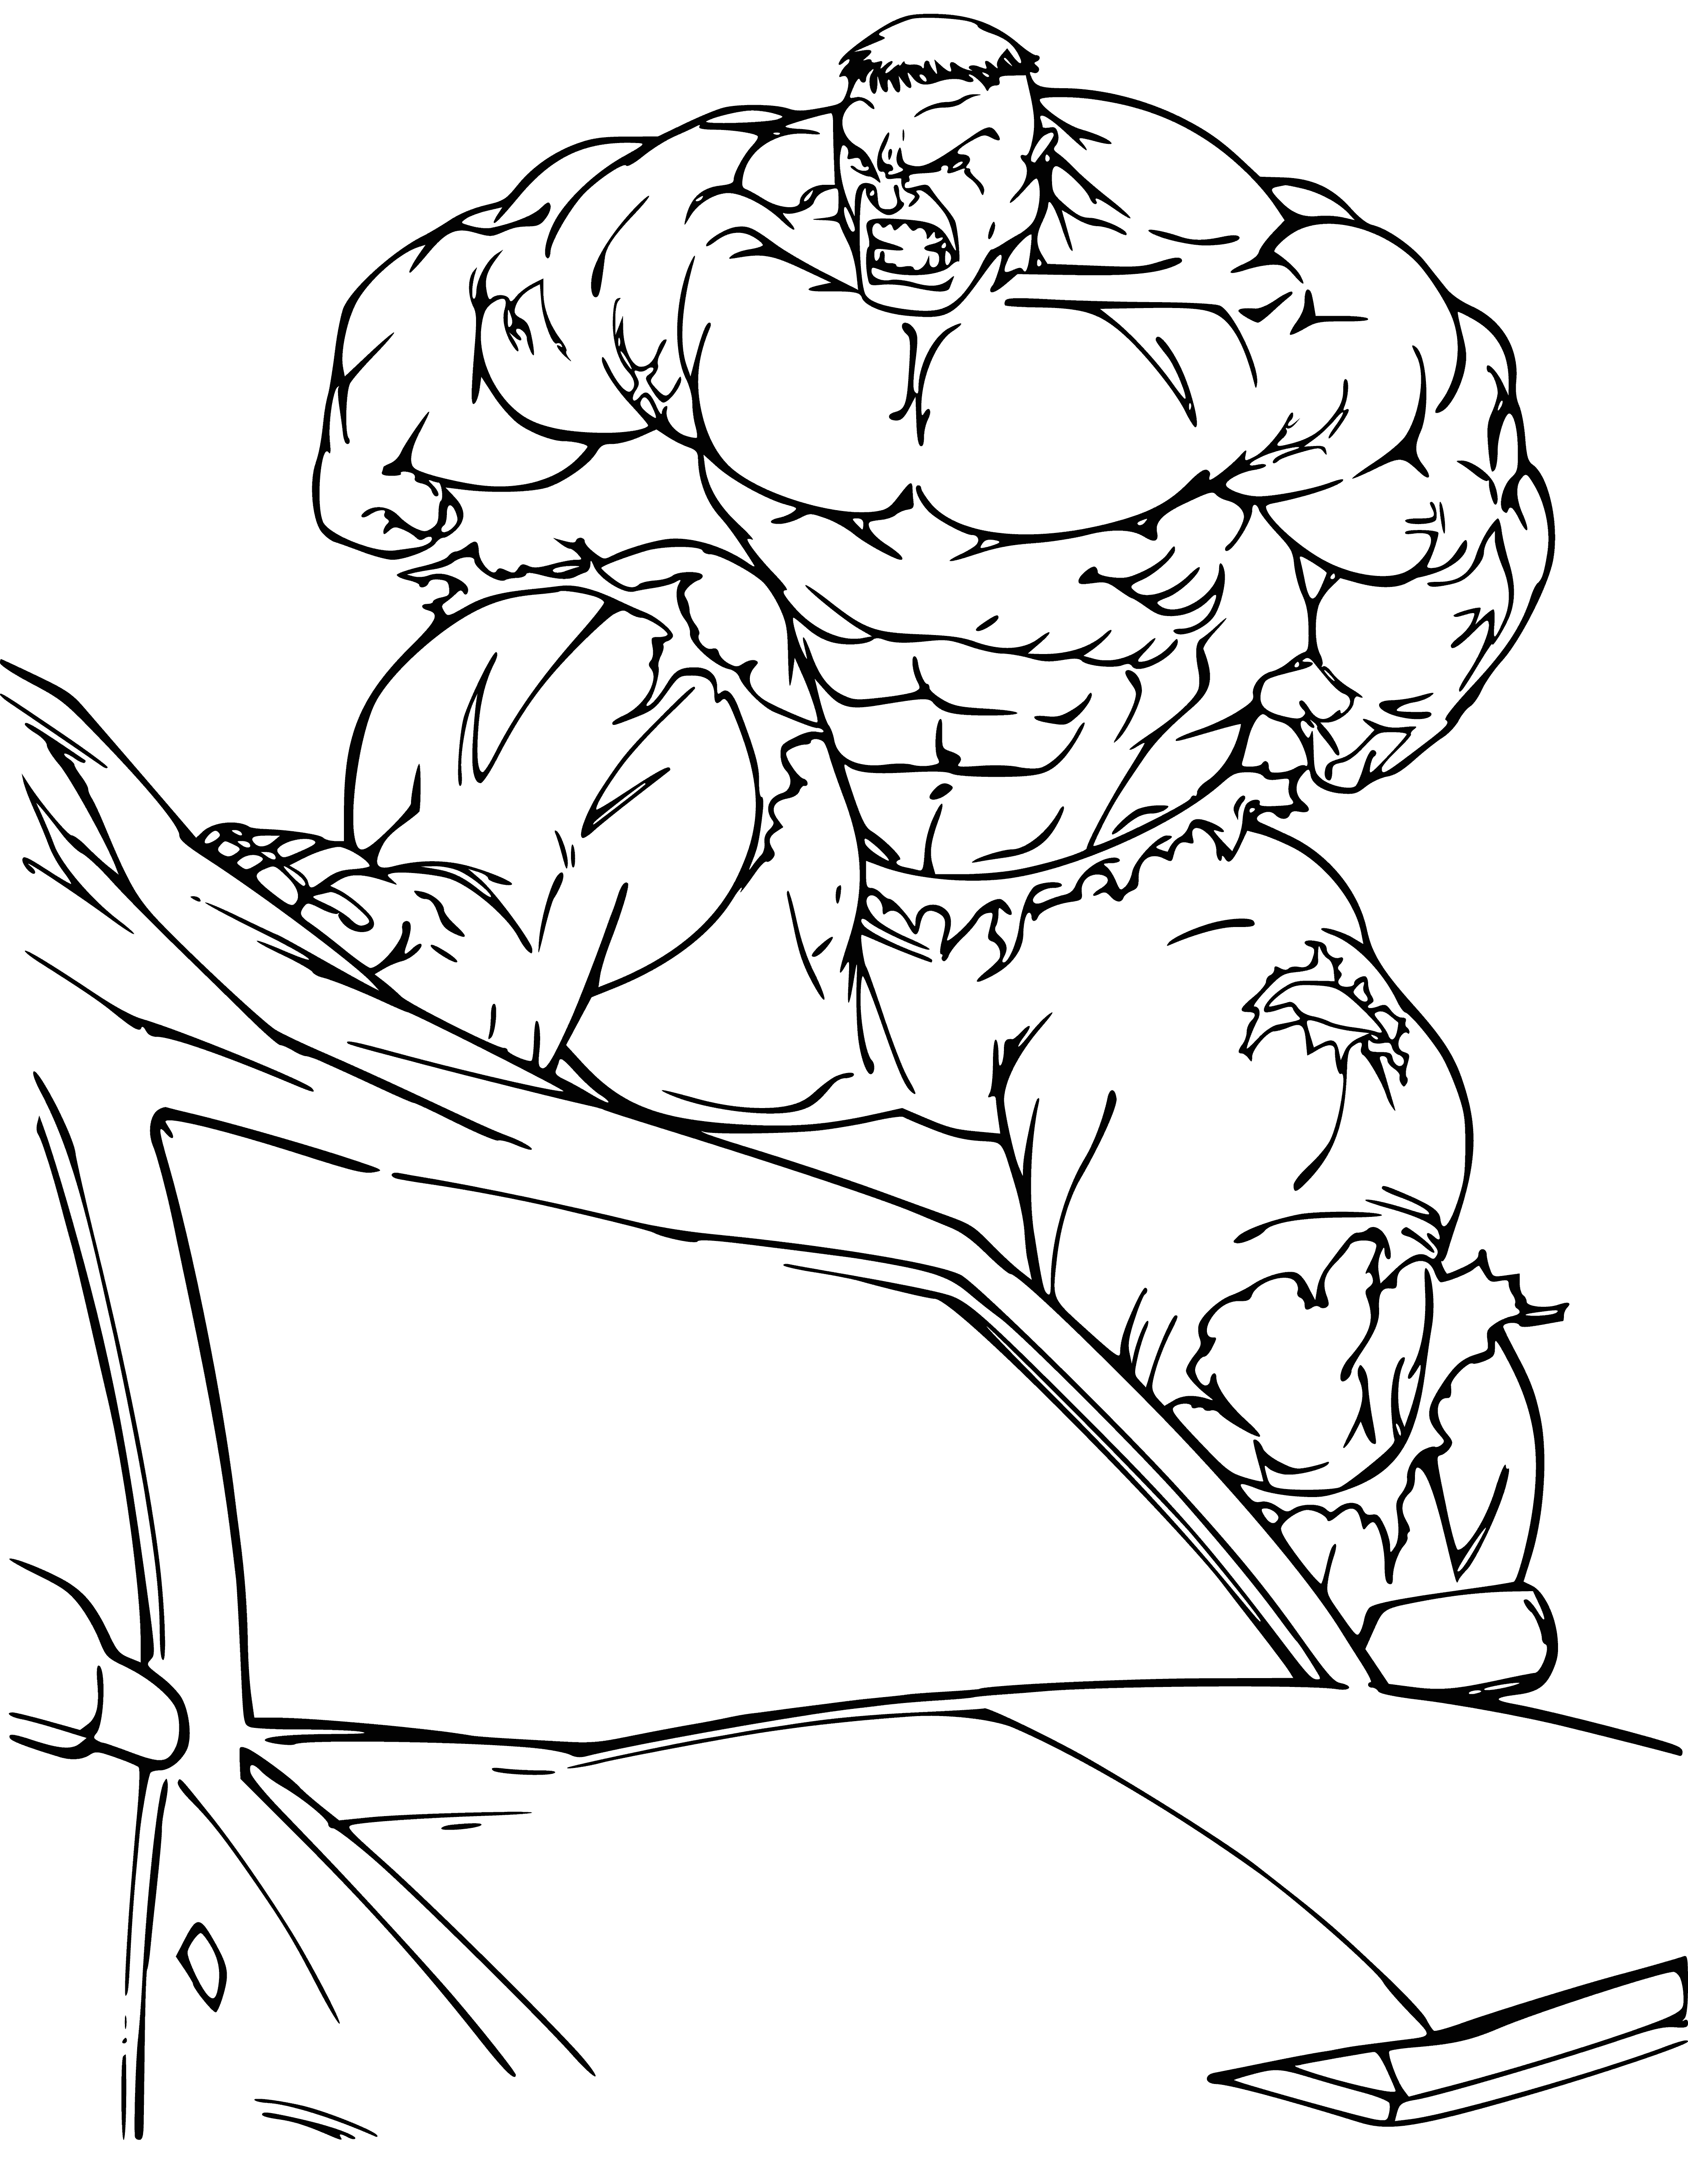 coloring page: The Hulk is a muscular green superhero created by a gamma radiation experiment, who grows stronger when angry. His strength and high durability enable him to heal very quickly.